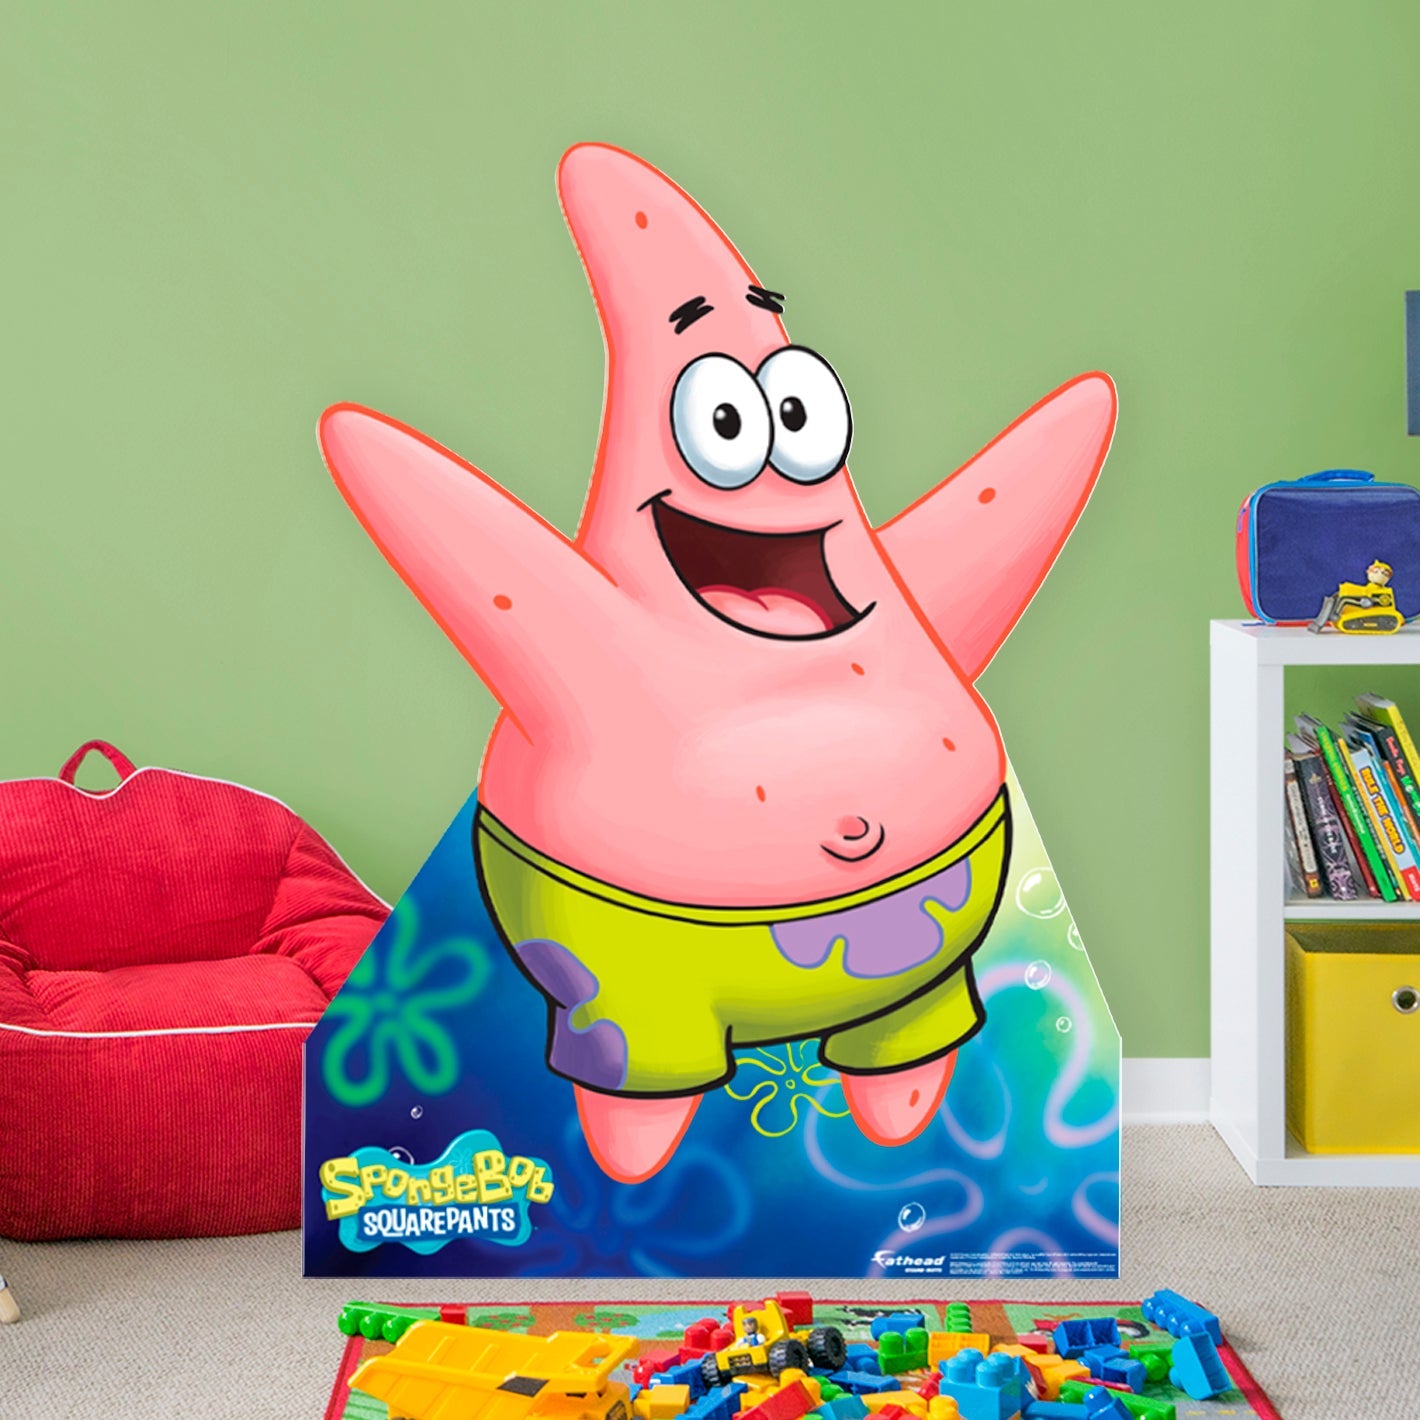 SpongeBob Squarepants: Patrick Life-Size Foam Core Cutout - Officially Licensed Nickelodeon Stand Out